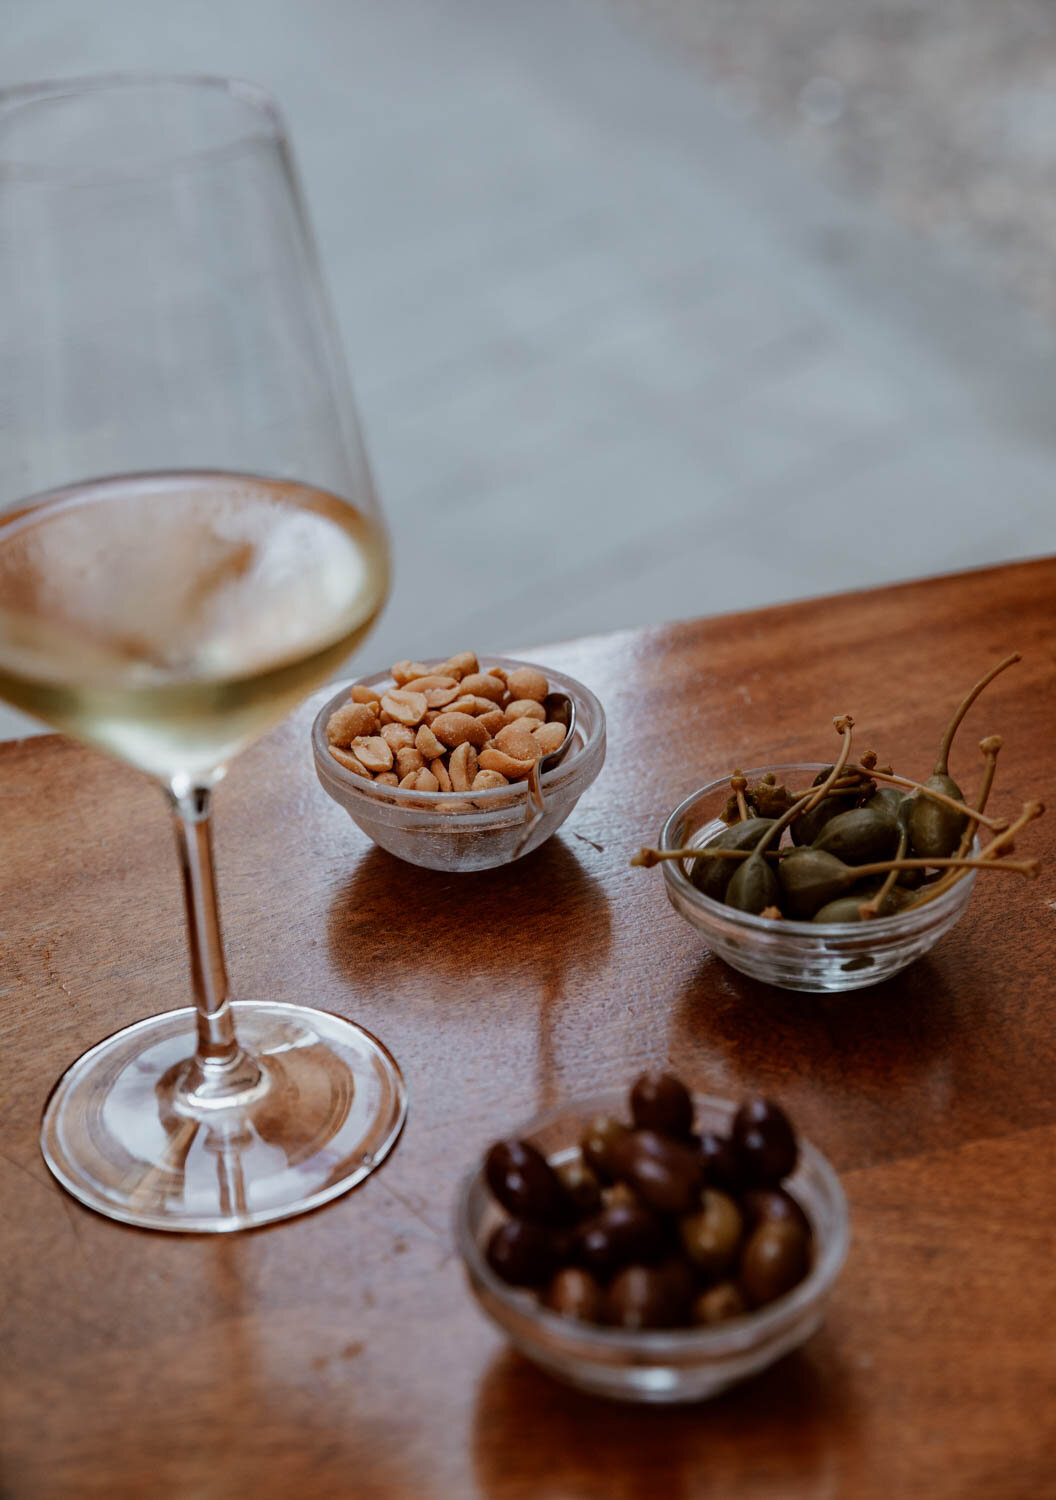 Glass of Cinque Terre wine with olives and capers